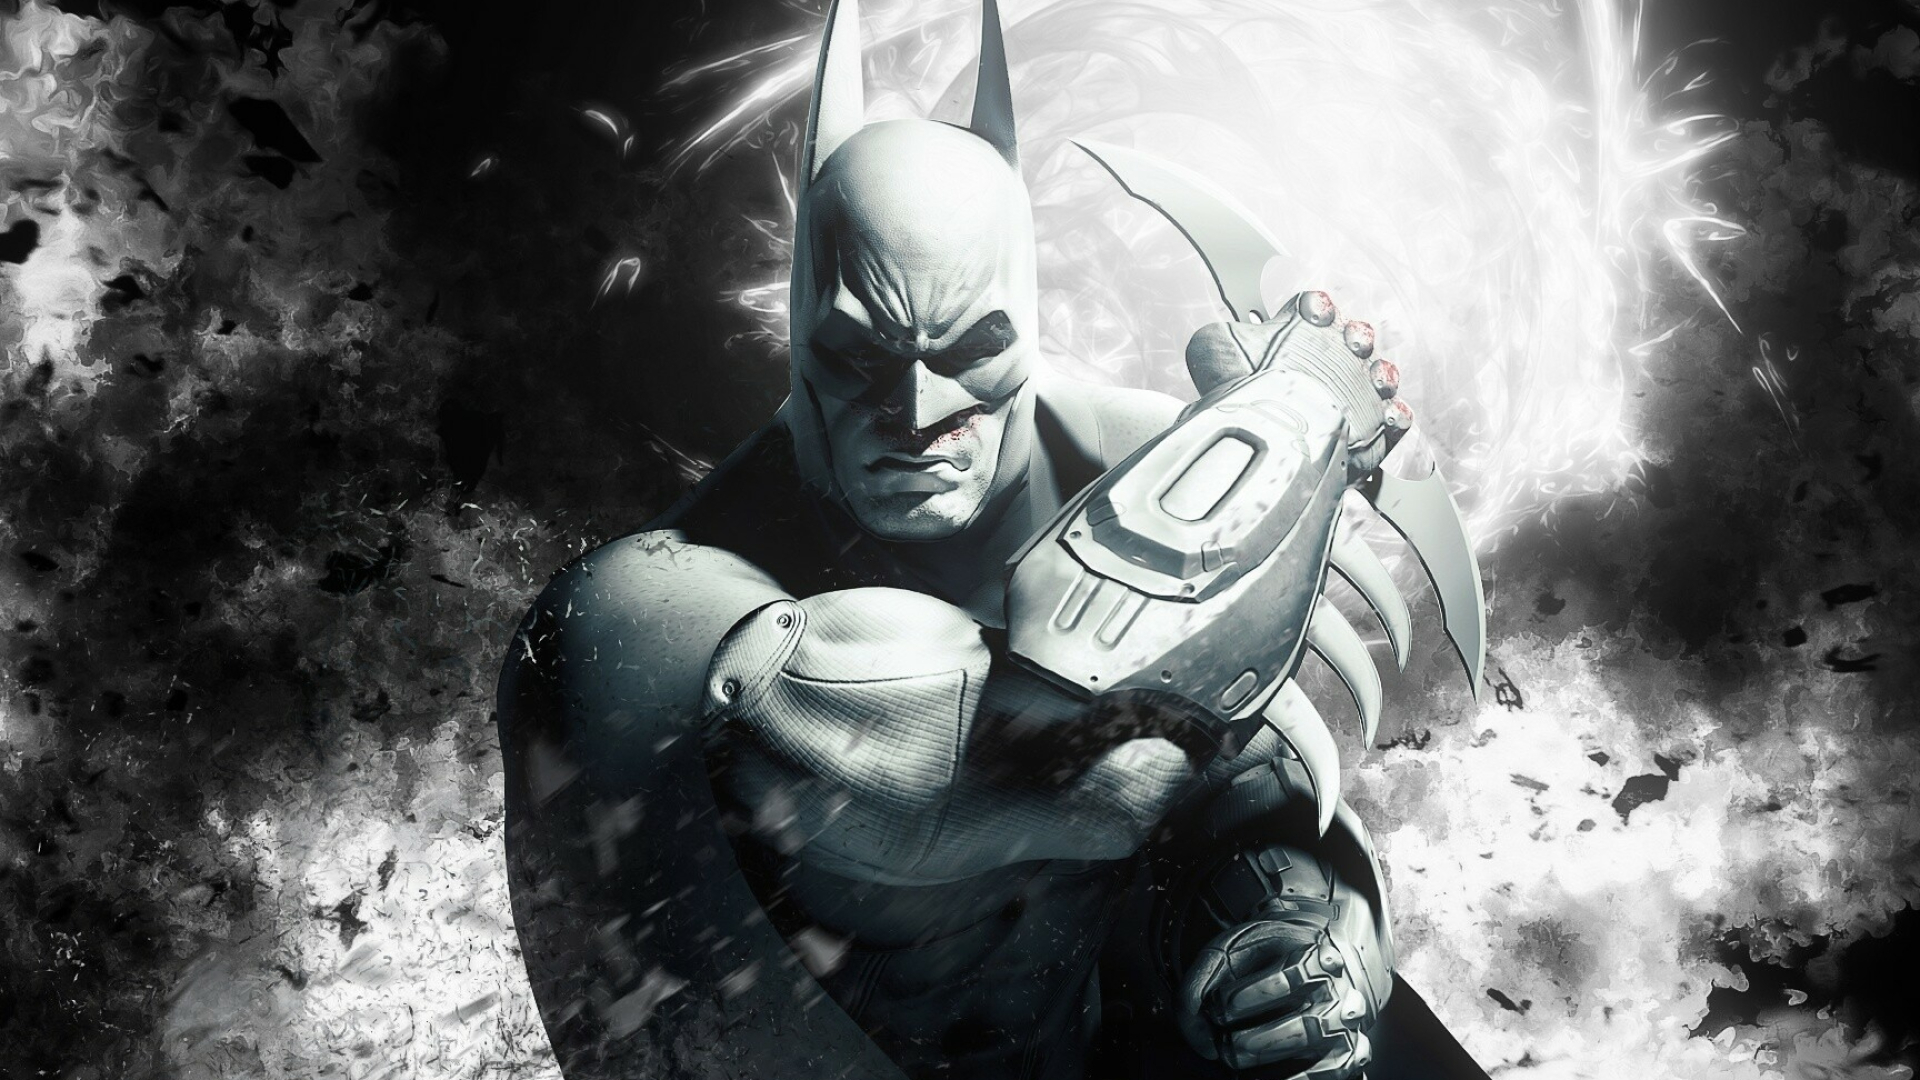 Batman: Arkham City: The Best Action/Adventure Game of 2011 by the GameSpot. 1920x1080 Full HD Background.